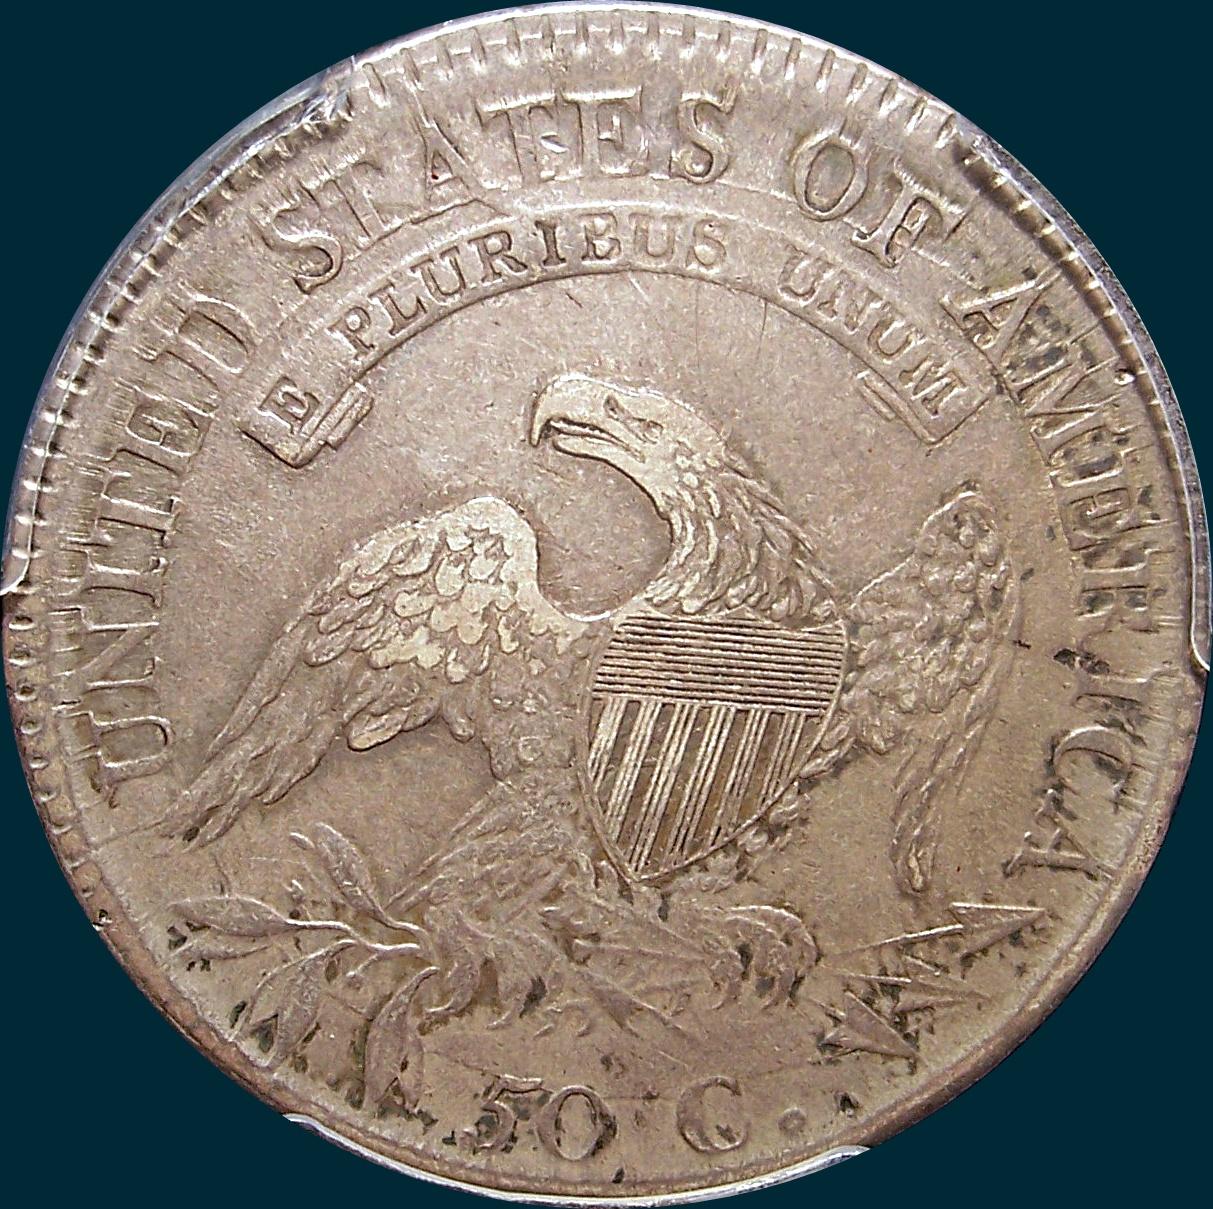 1811 o-107, small 8, capped bust half dollar